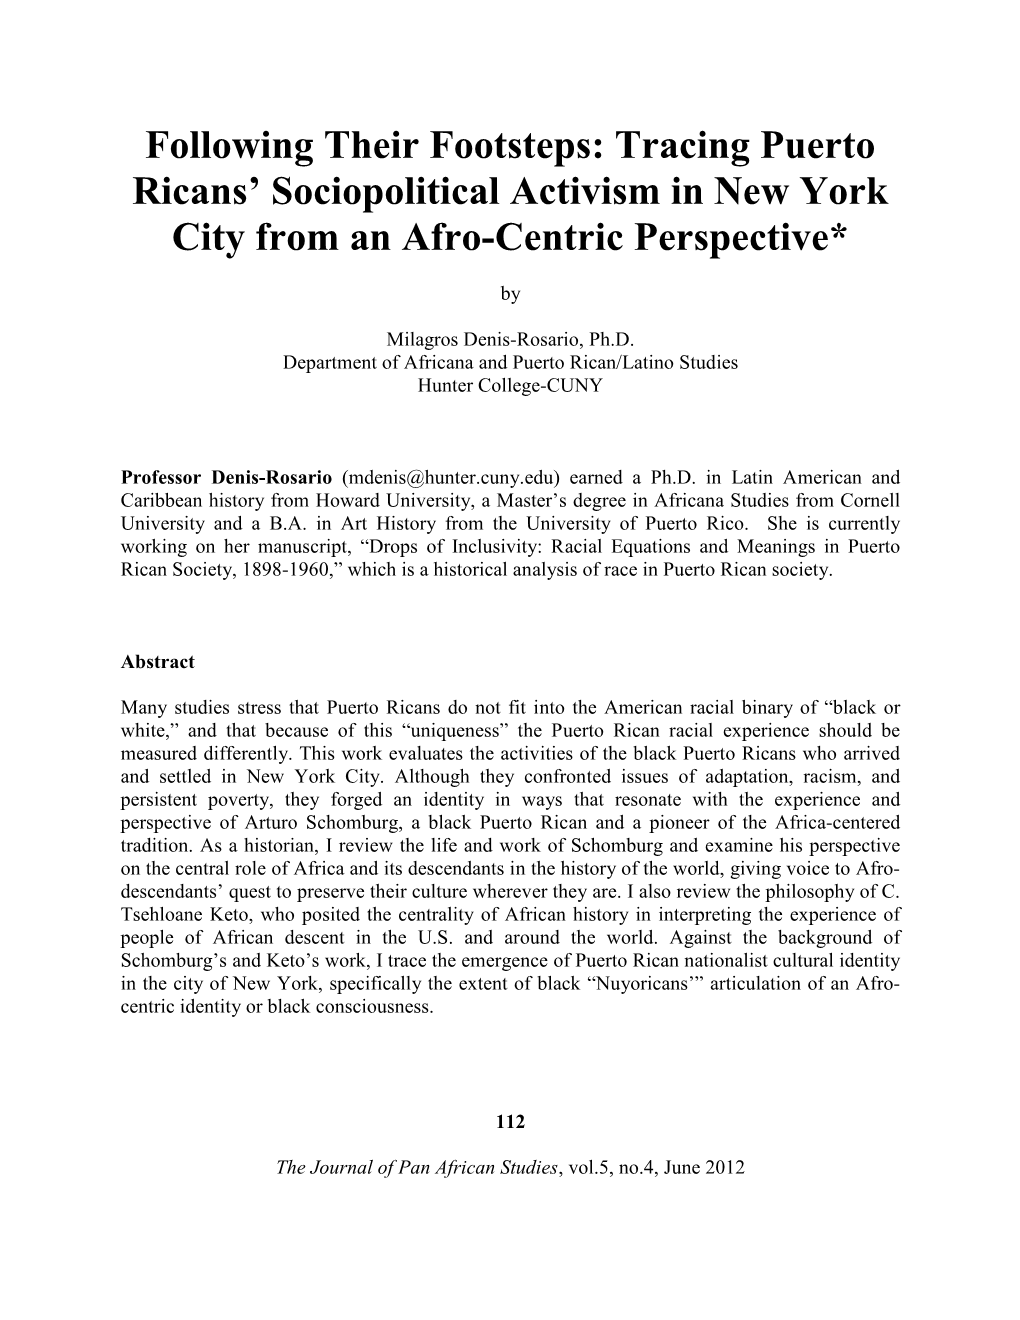 Tracing Puerto Ricans' Sociopolitical Activism in New York City from An